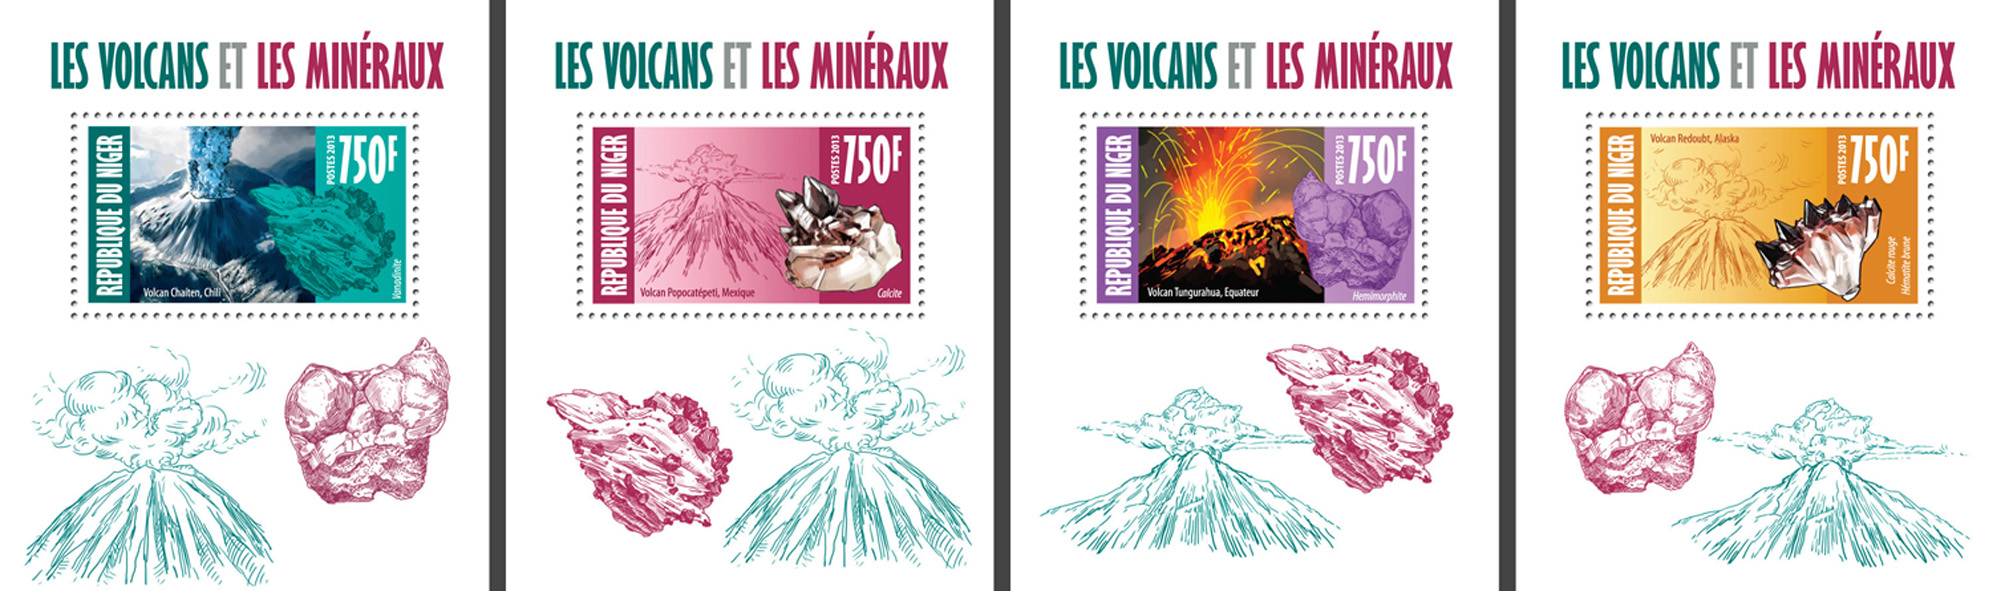 Volcanoes and minerals - Issue of Niger postage stamps